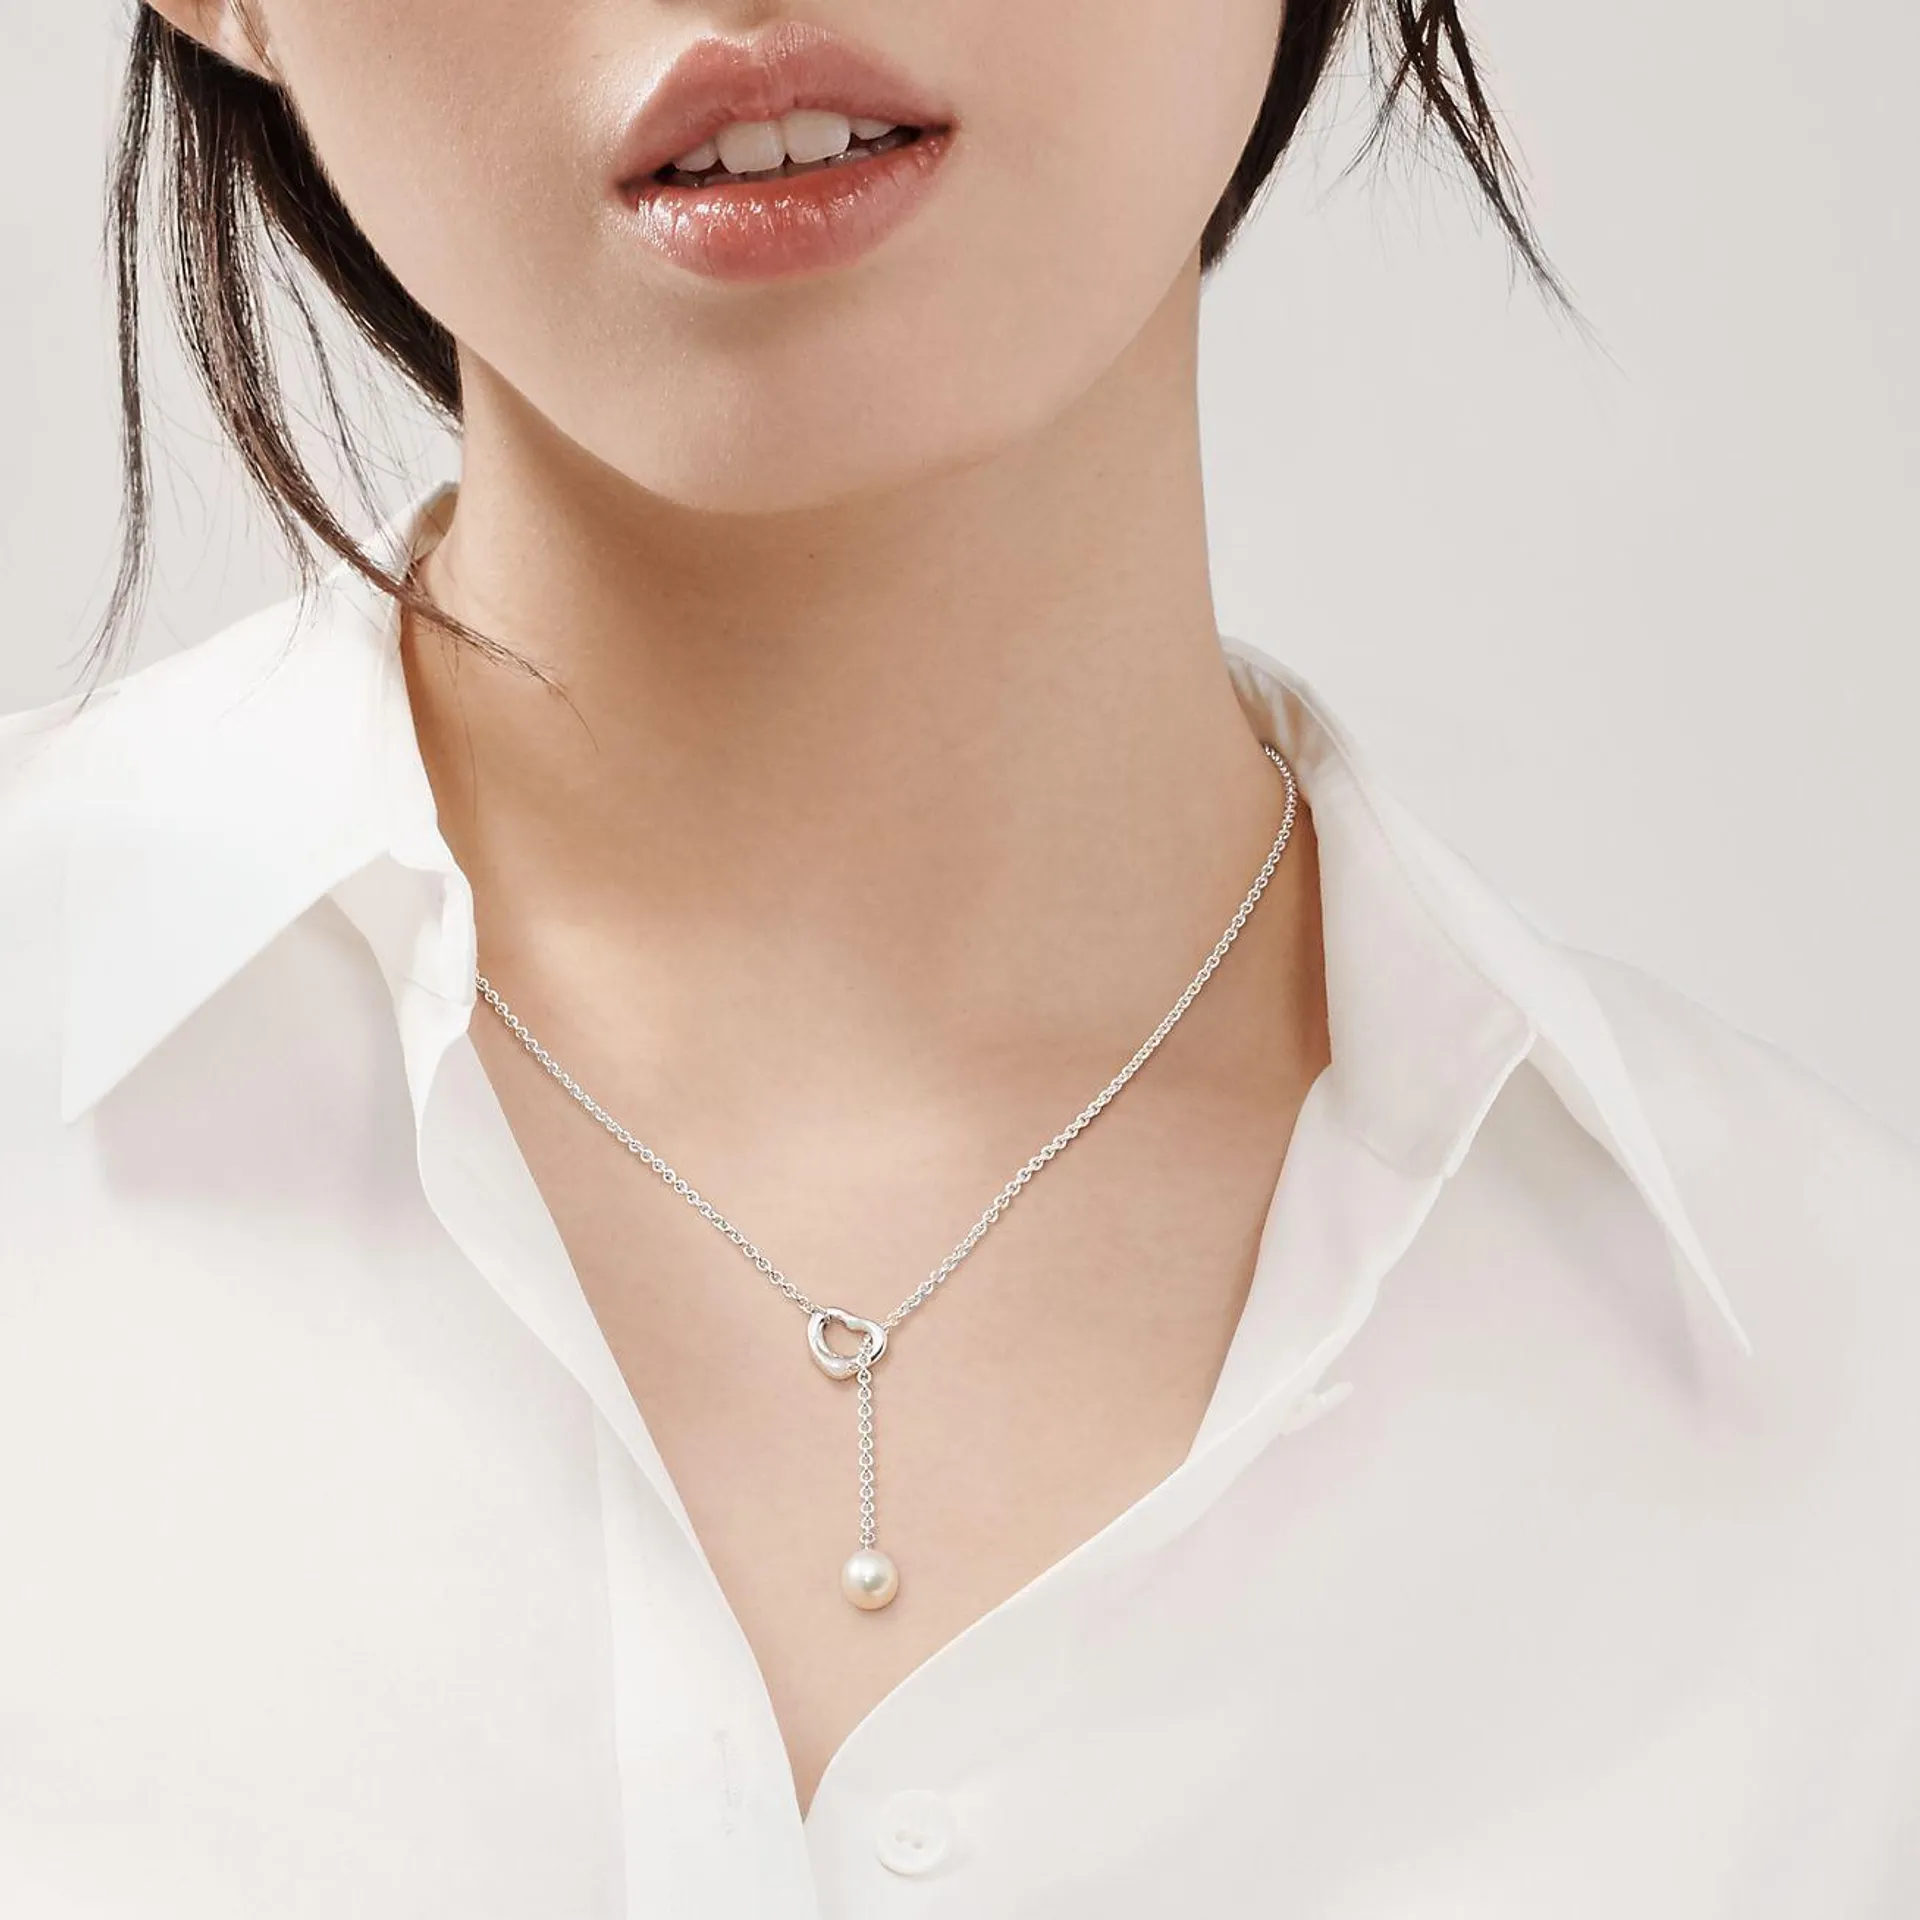 Elsa Peretti® Open Heart Lariat Necklace in Silver with Pearls, 7.5-8 mm